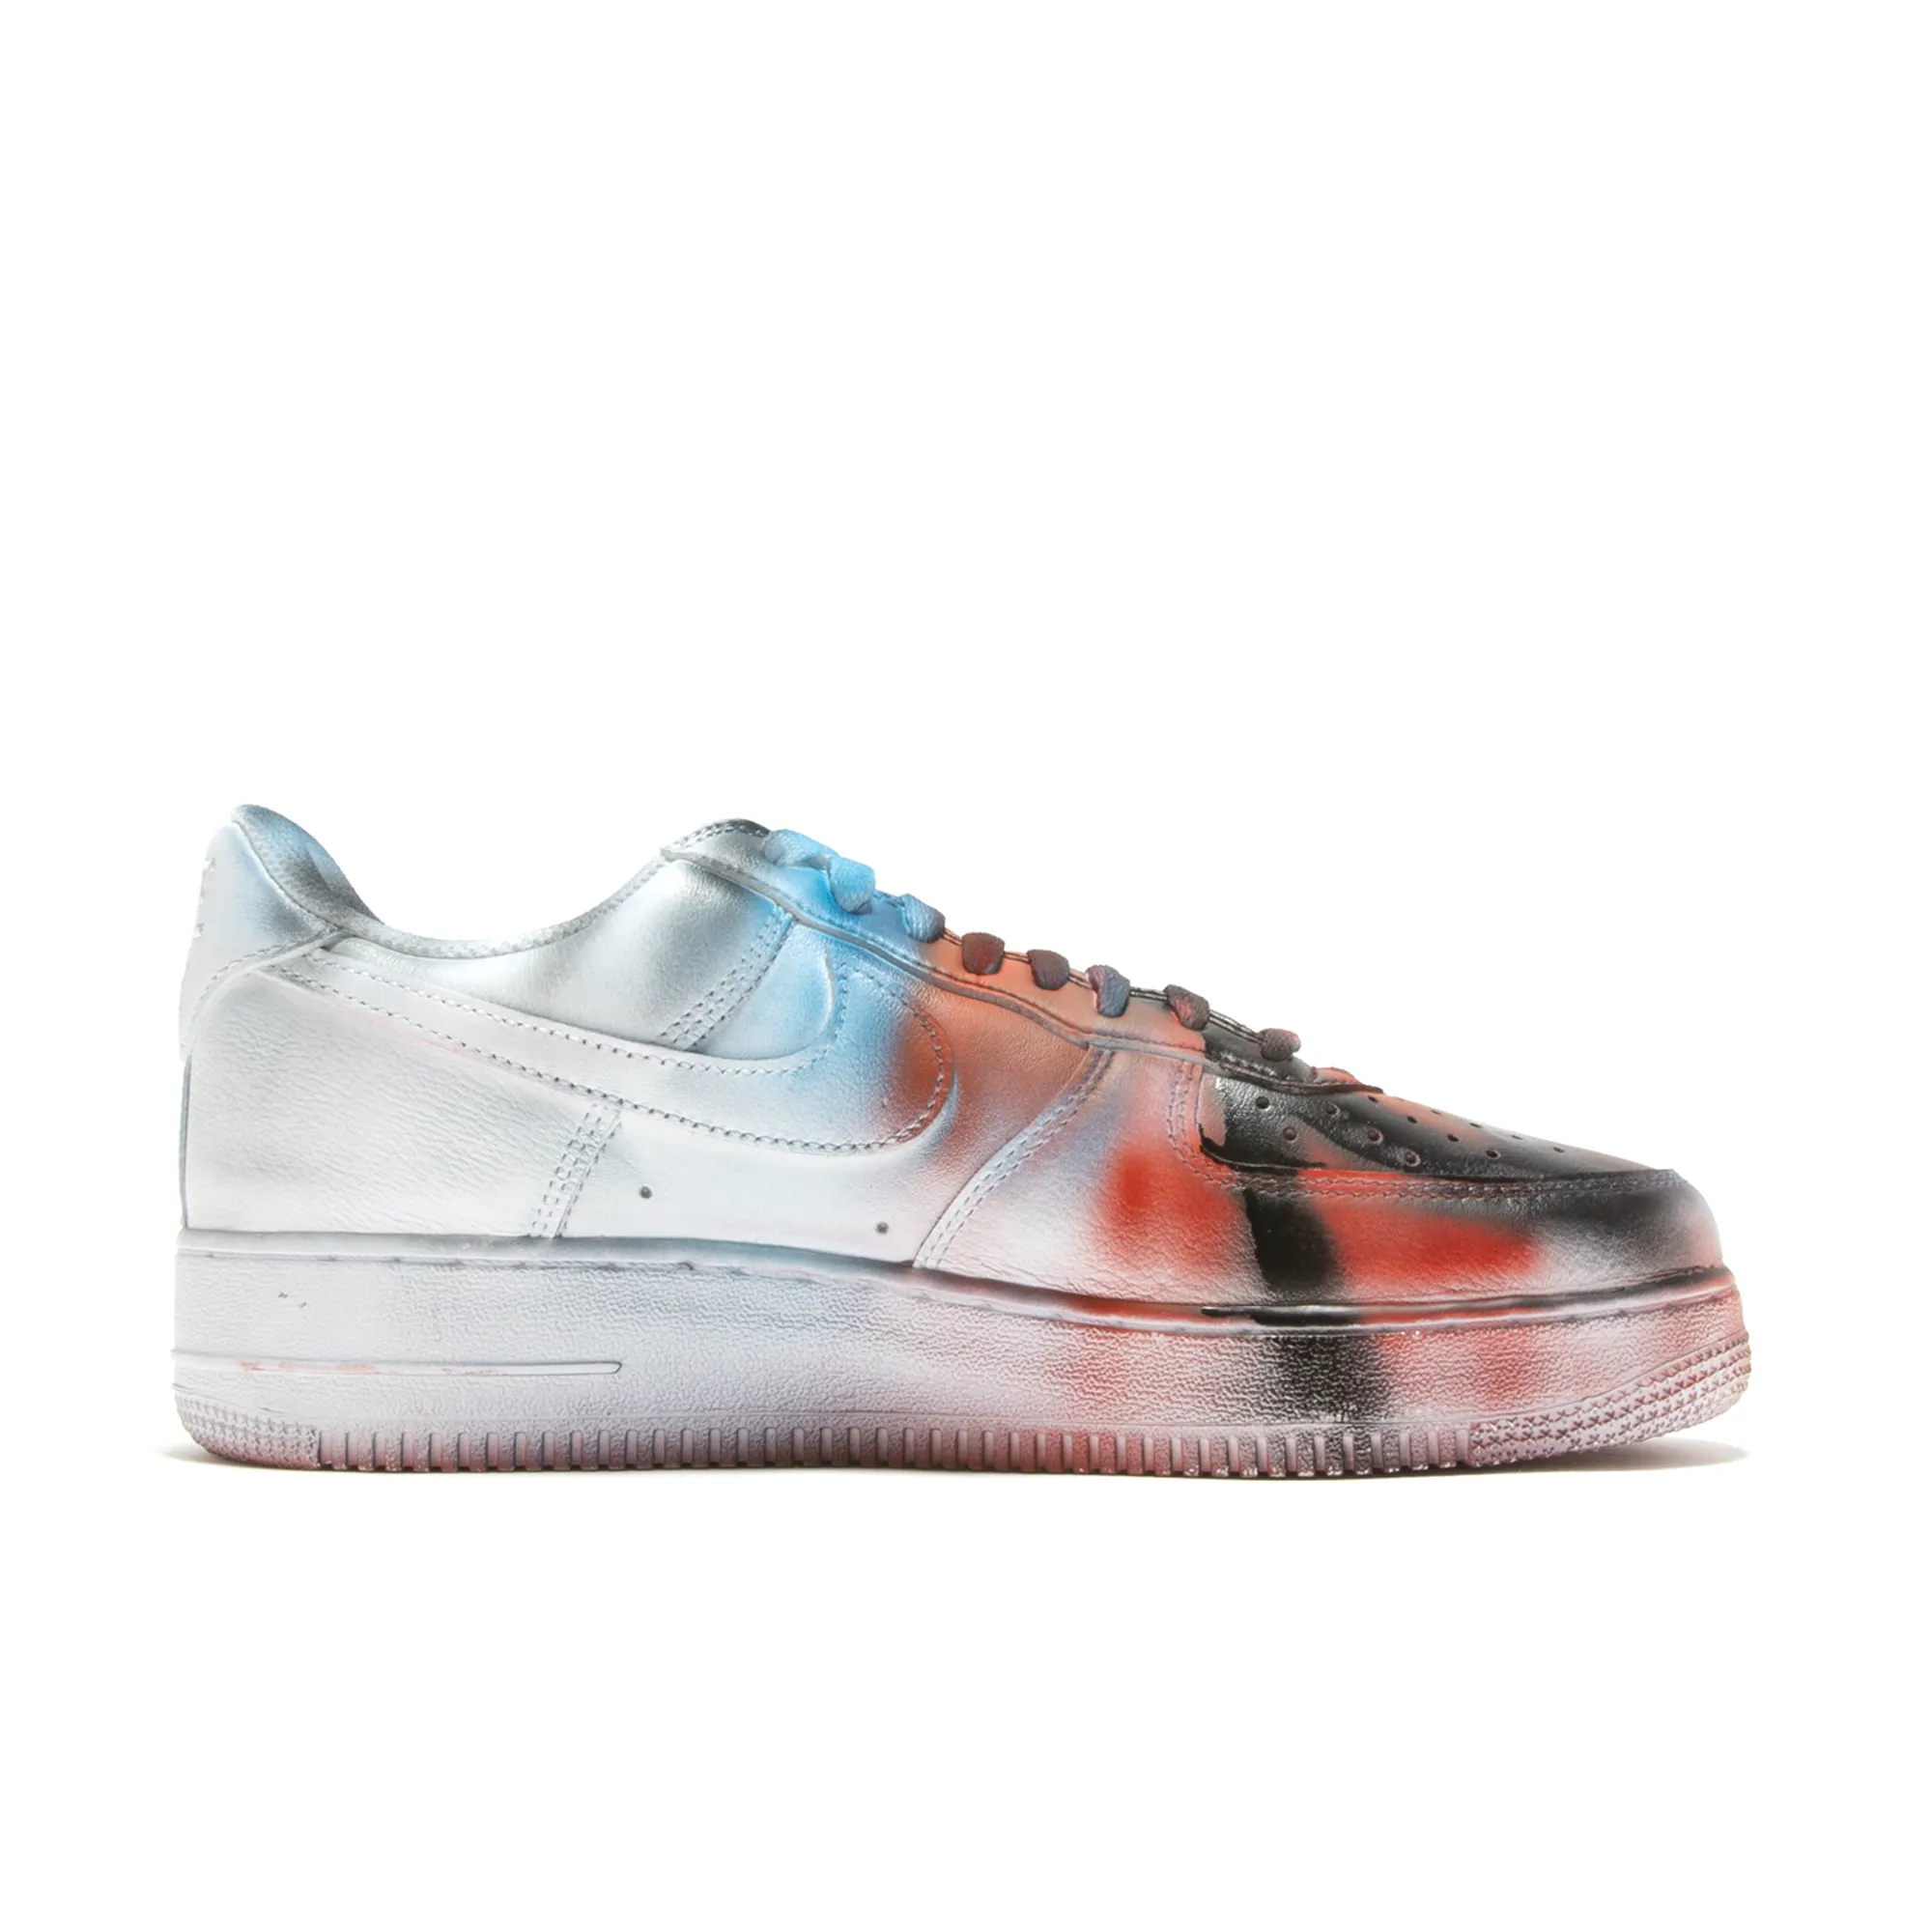 UNION TOKYOにて「Custom painted AIR FORCE 1 by RYOTA DAIMON」を抽選にてプレゼント (ユニオン エア フォース 1)